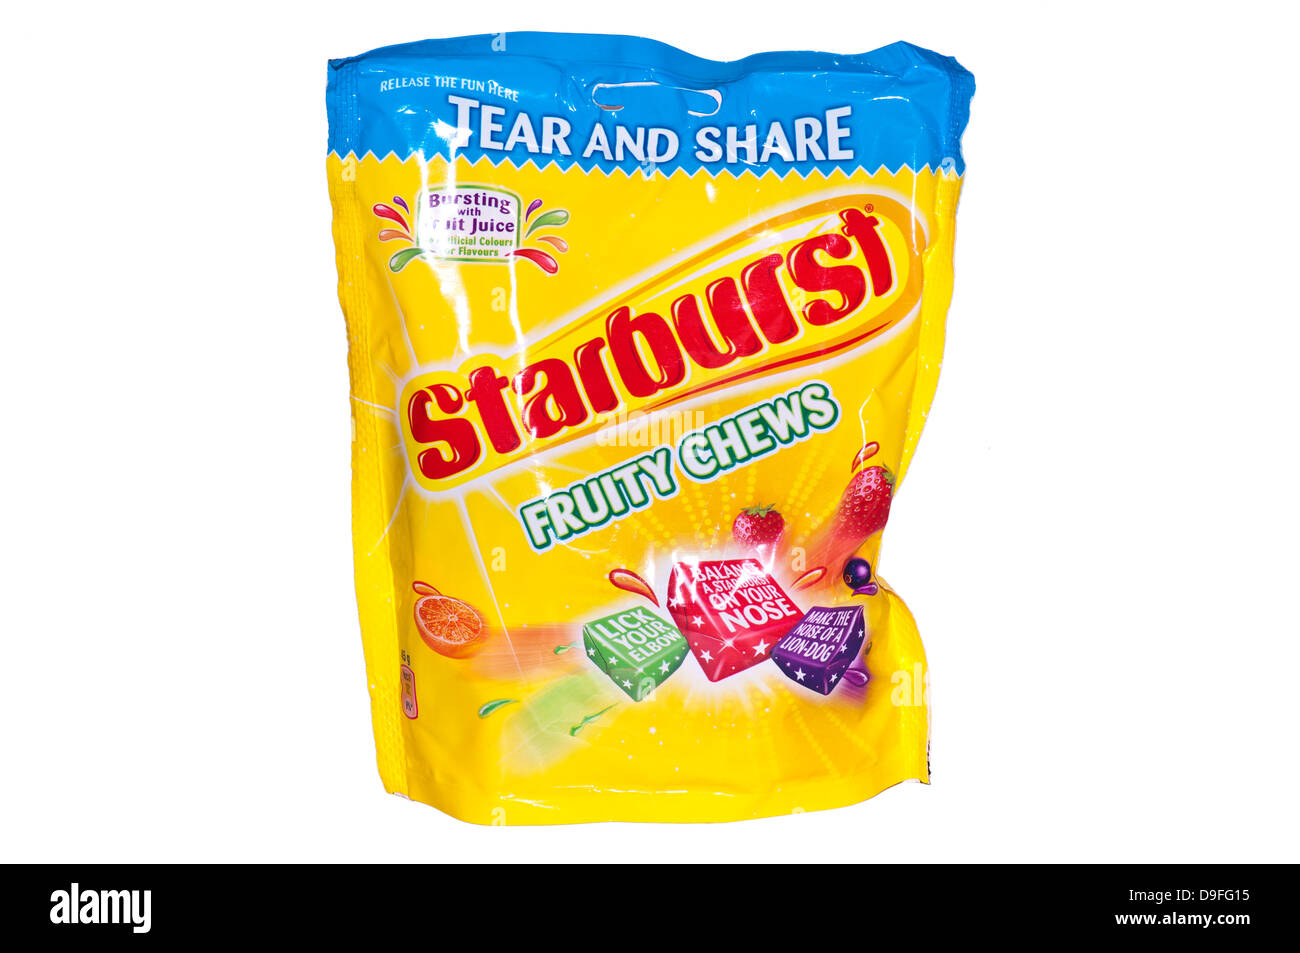 Bag Of Starburst Fruity Chews Sweets Stock Photo